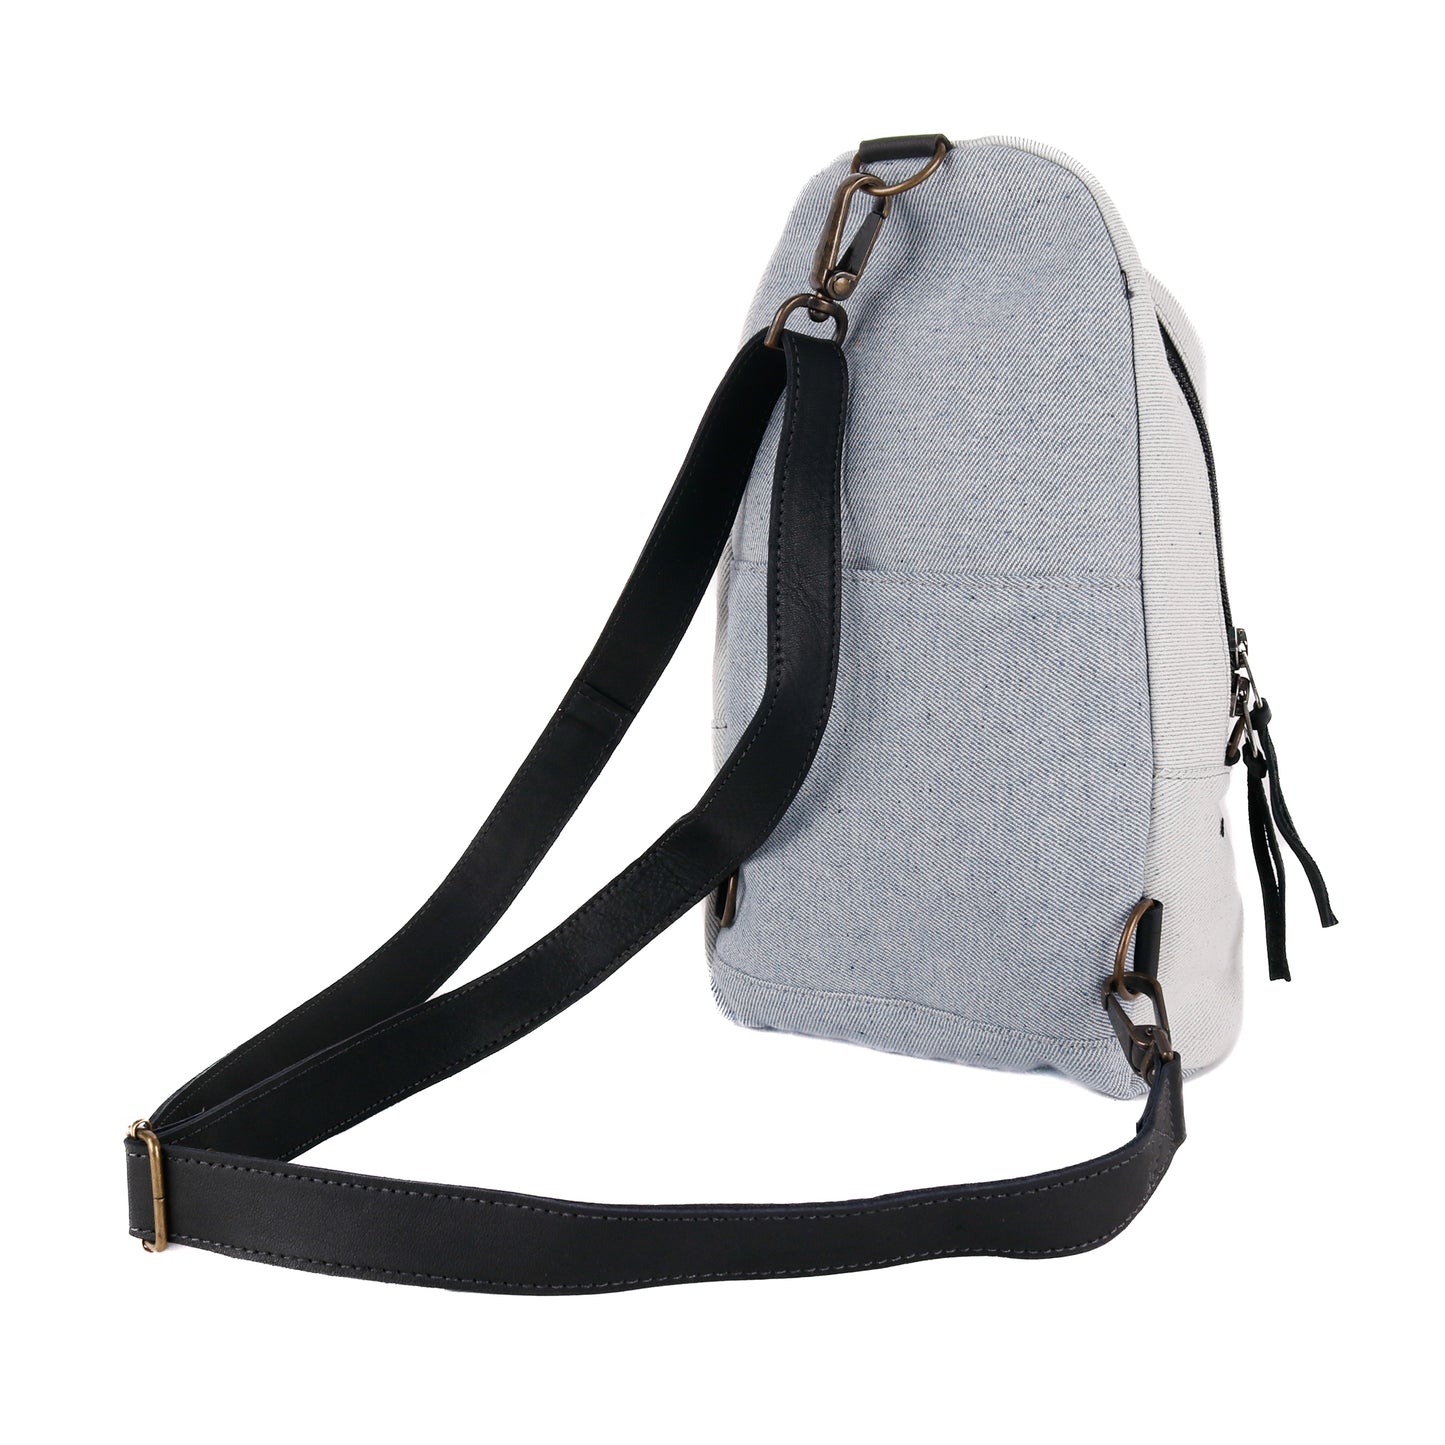 CROSSBODY SLING 2.0 - UPCYCLED DENIM WITH PATCH - BLACK - NO. 11330